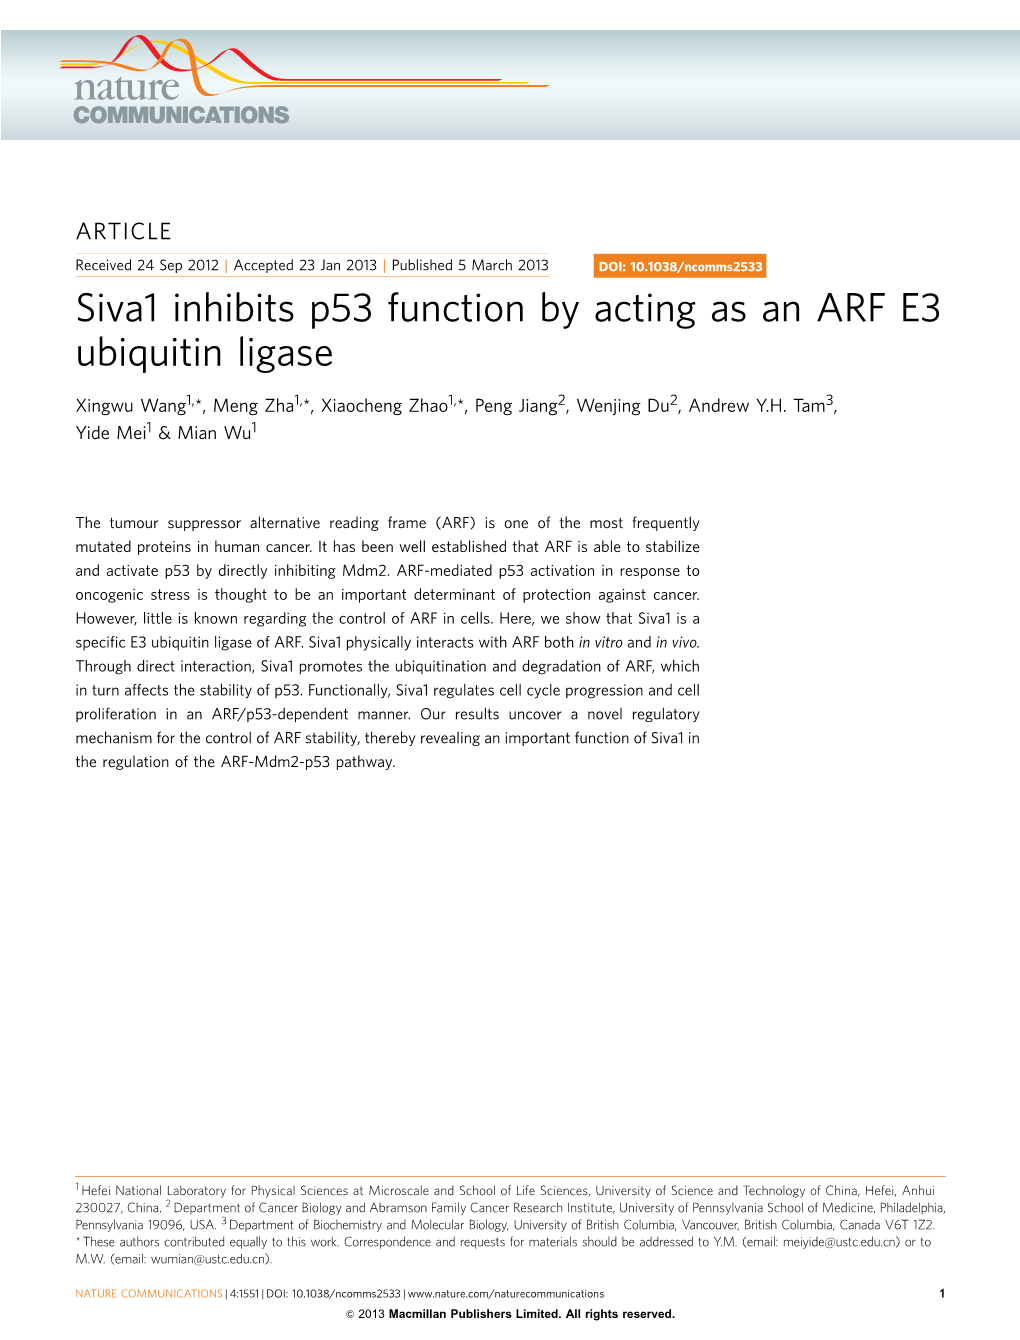 Siva1 Inhibits P53 Function by Acting As an ARF E3 Ubiquitin Ligase